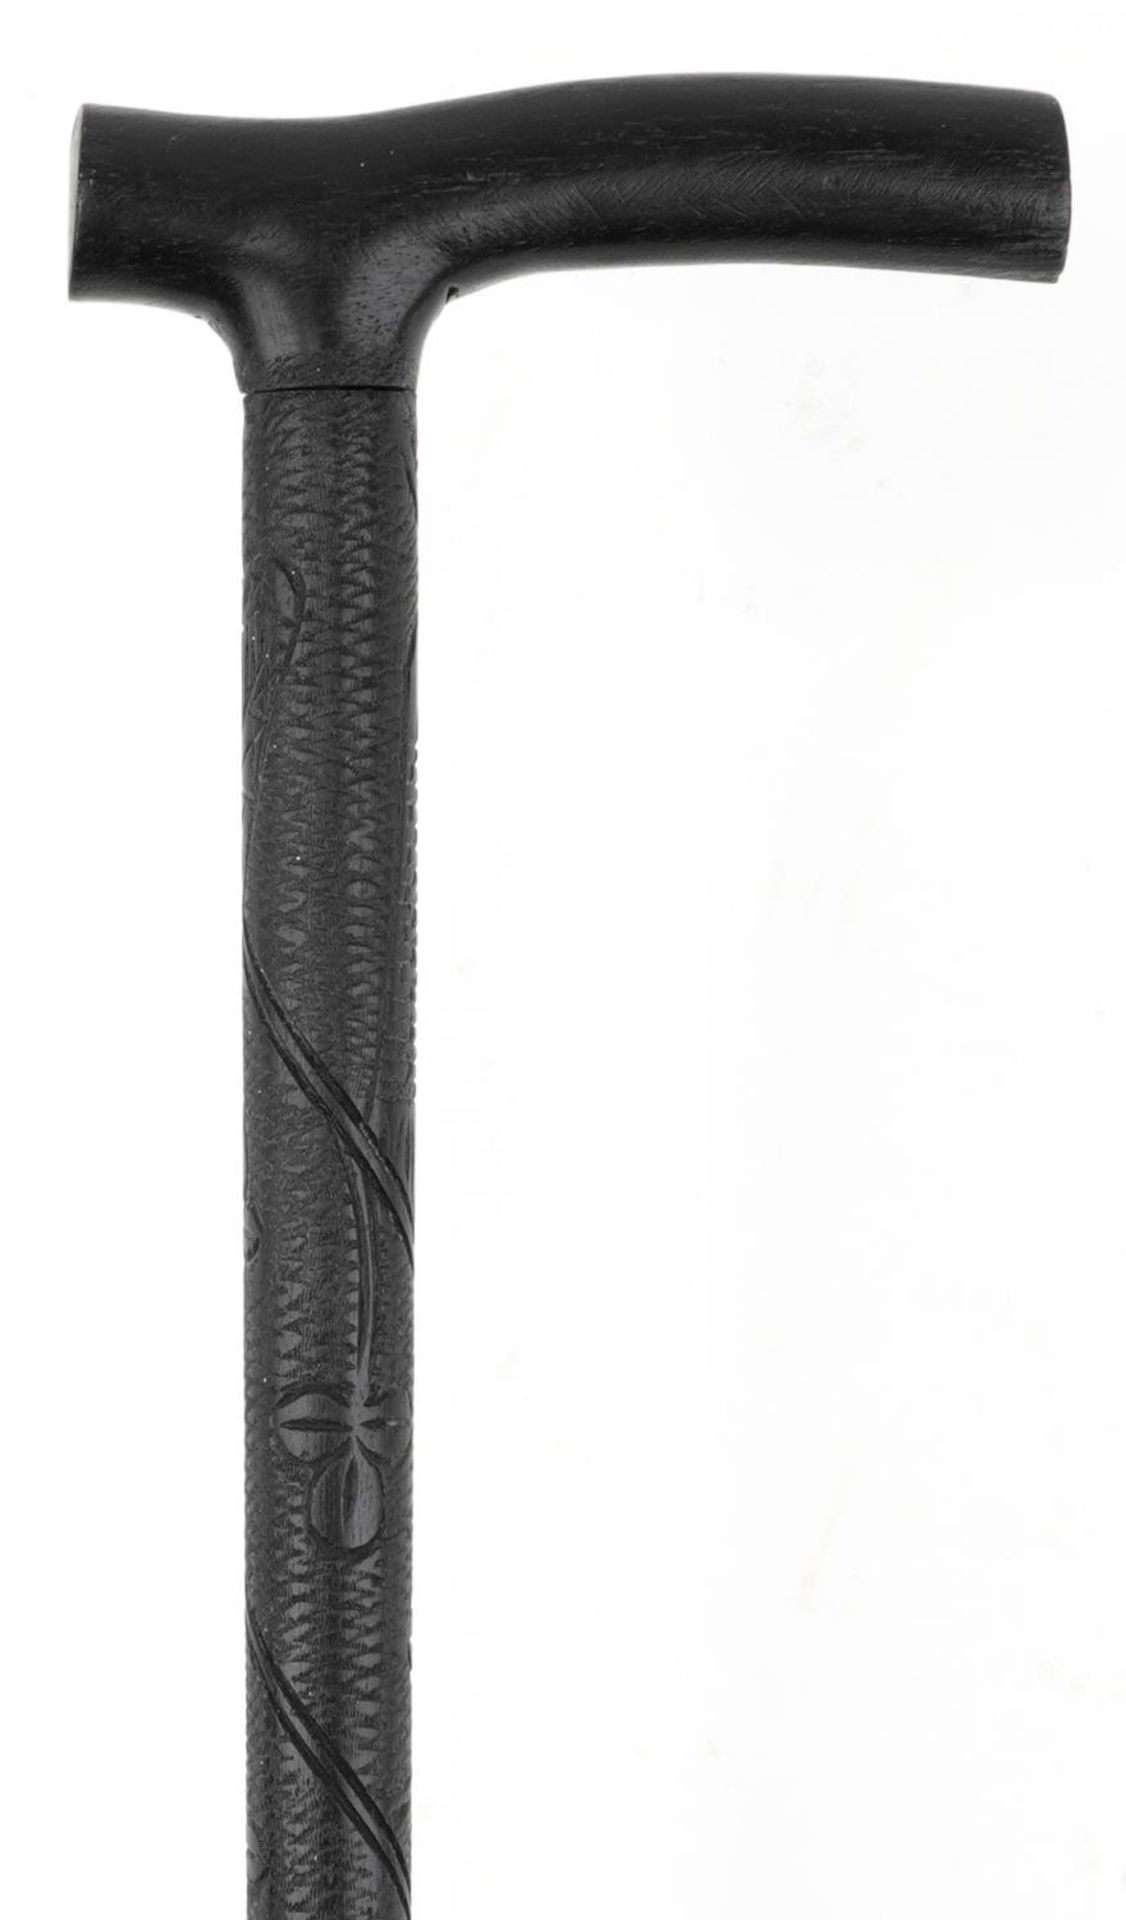 19th century Irish bog oak walking stick carved with a harp and shamrocks, 90cm in length : For